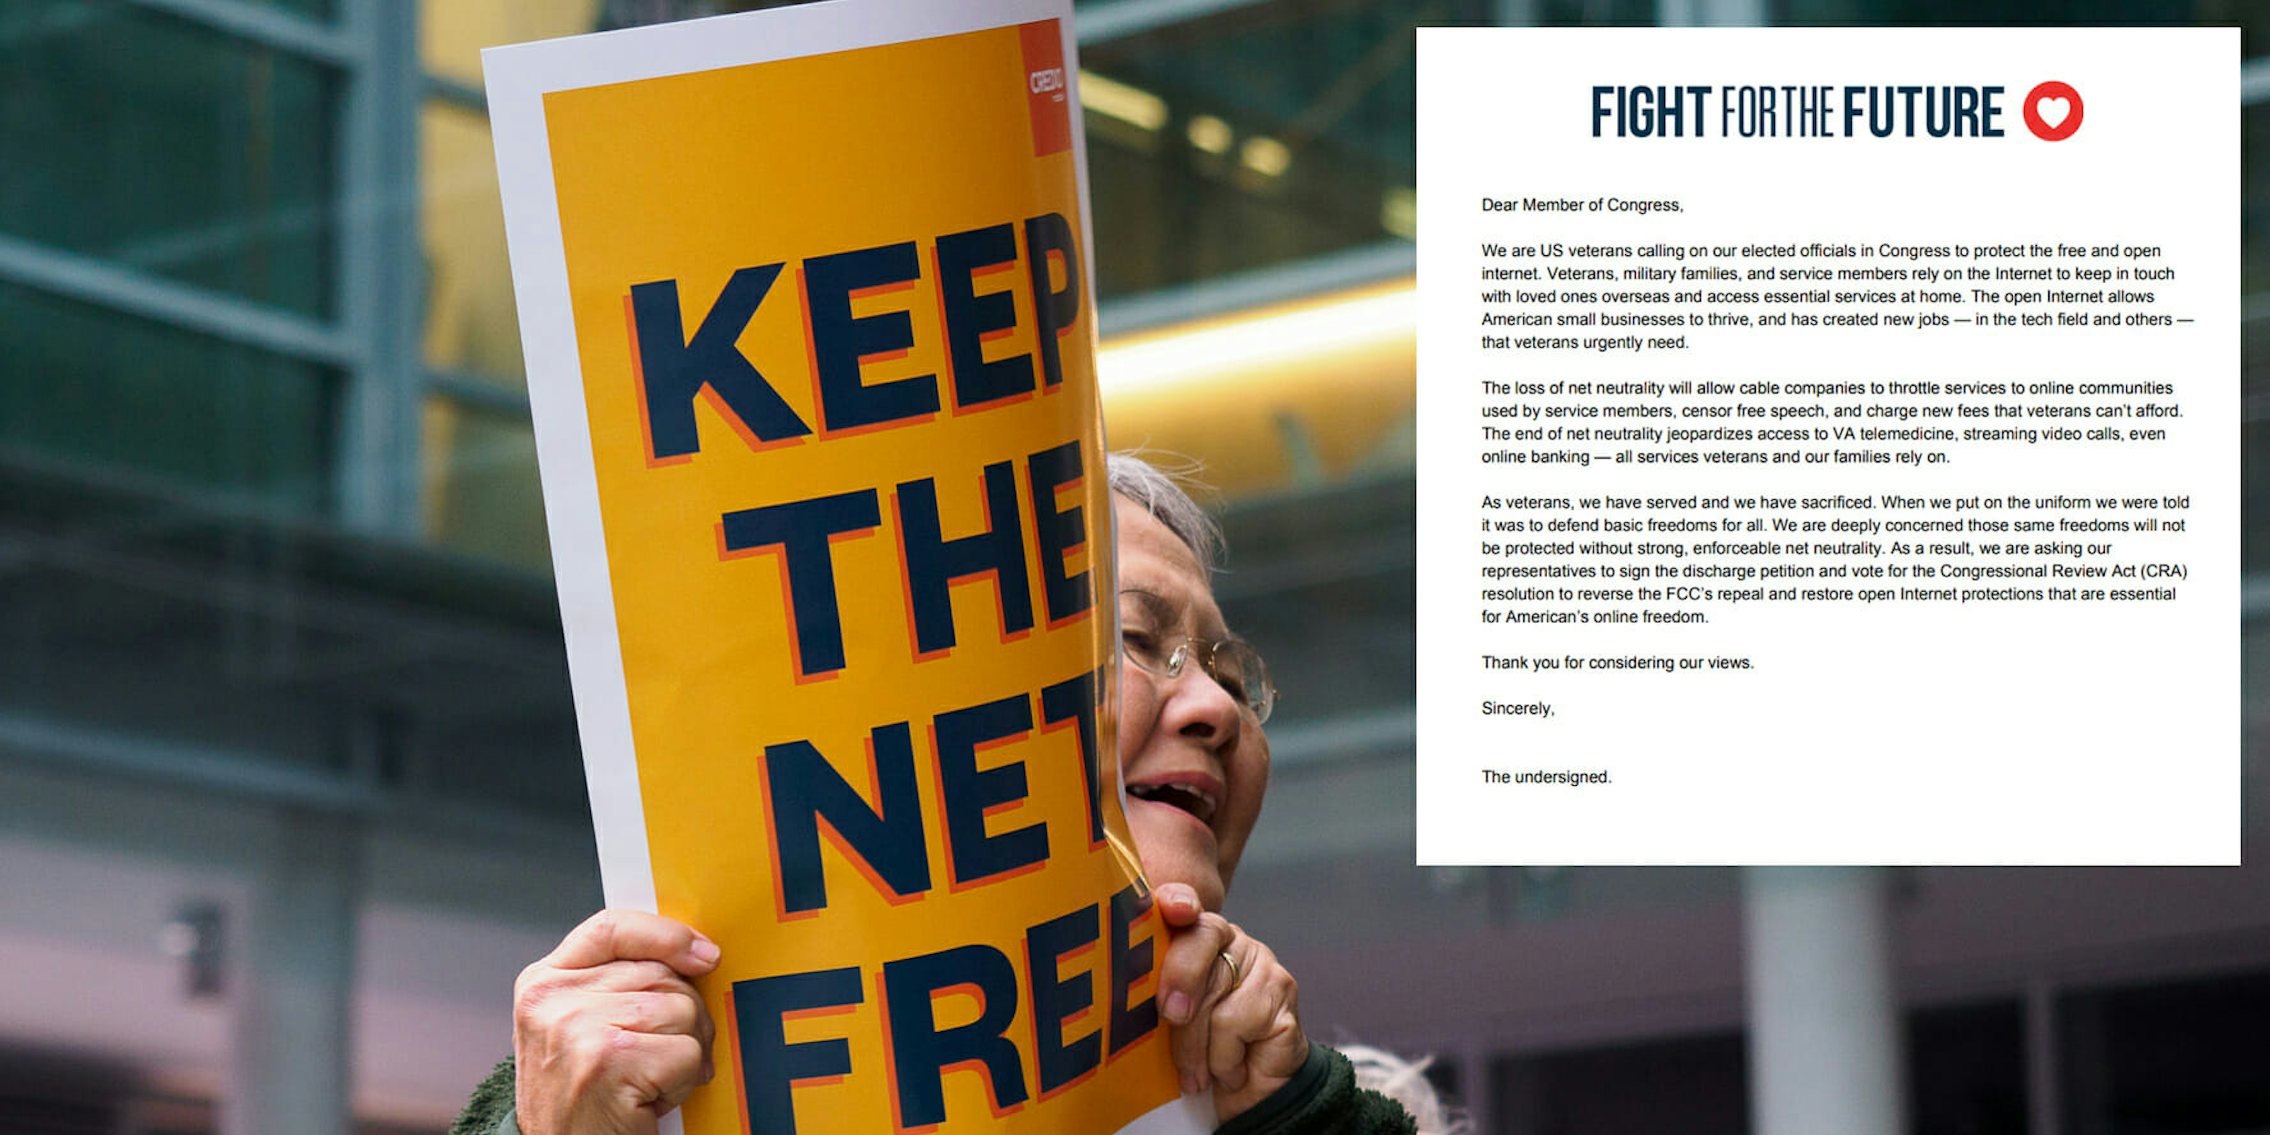 More than 1,000 veterans have signed a letter urging lawmakers to support an effort in Congress restore net neutrality rules. 